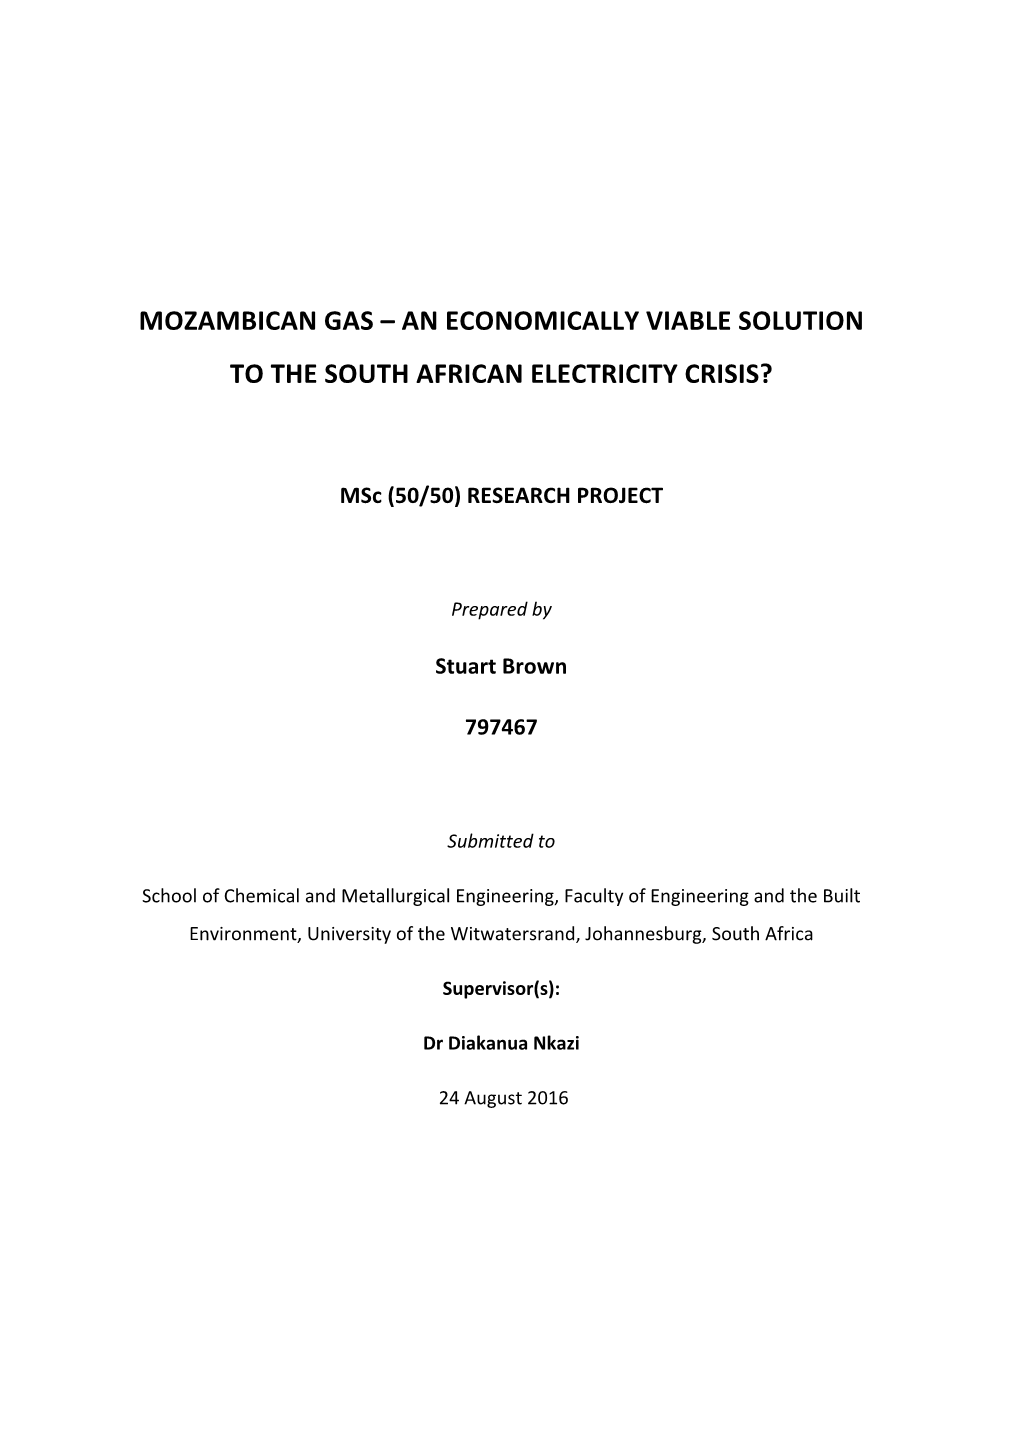 Mozambican Gas – an Economically Viable Solution to the South African Electricity Crisis?